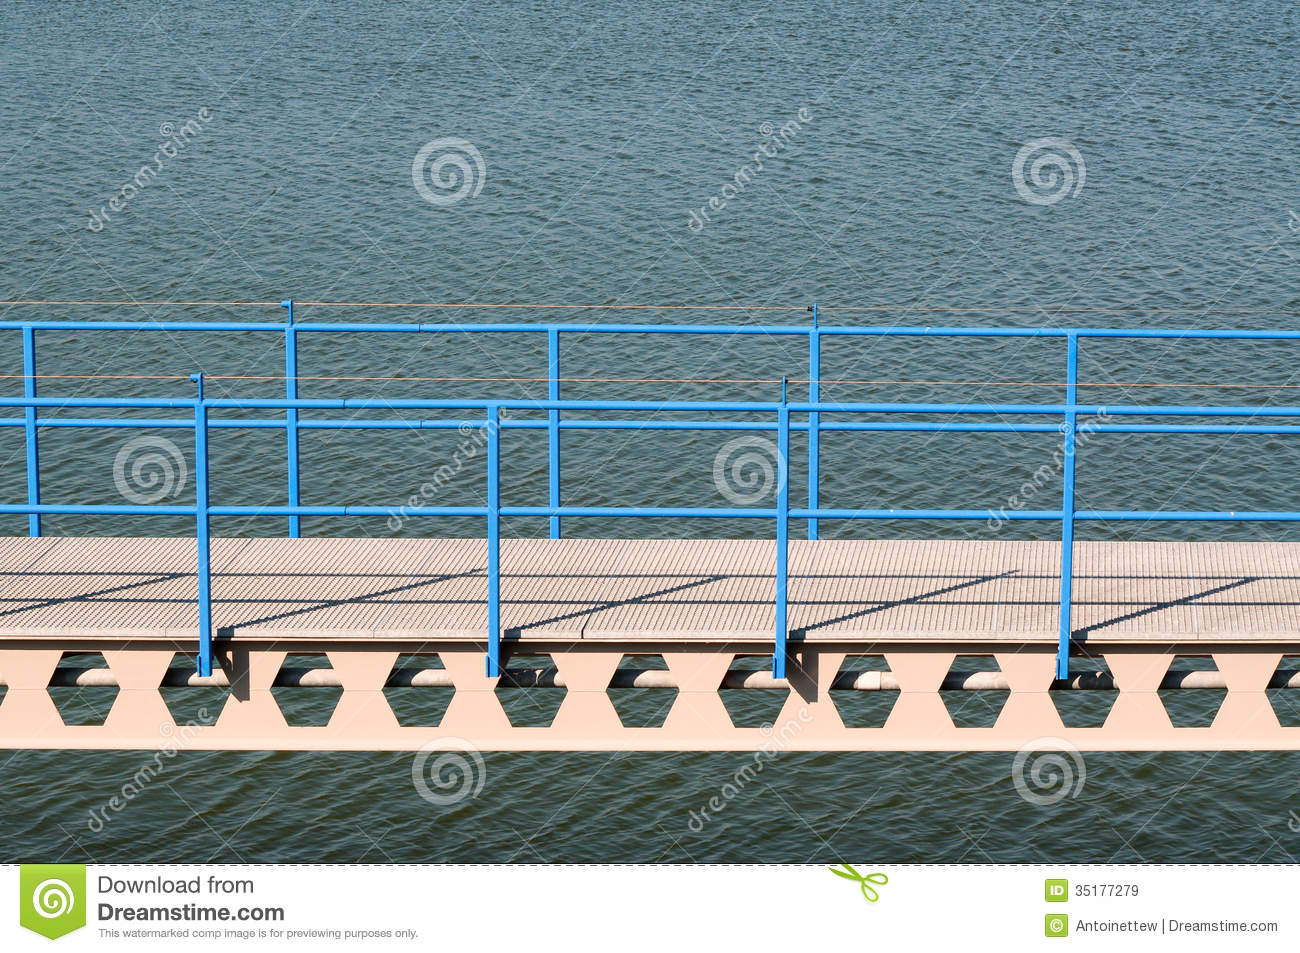 Bridge Over Water Royalty Free Stock Images   Image  35177279